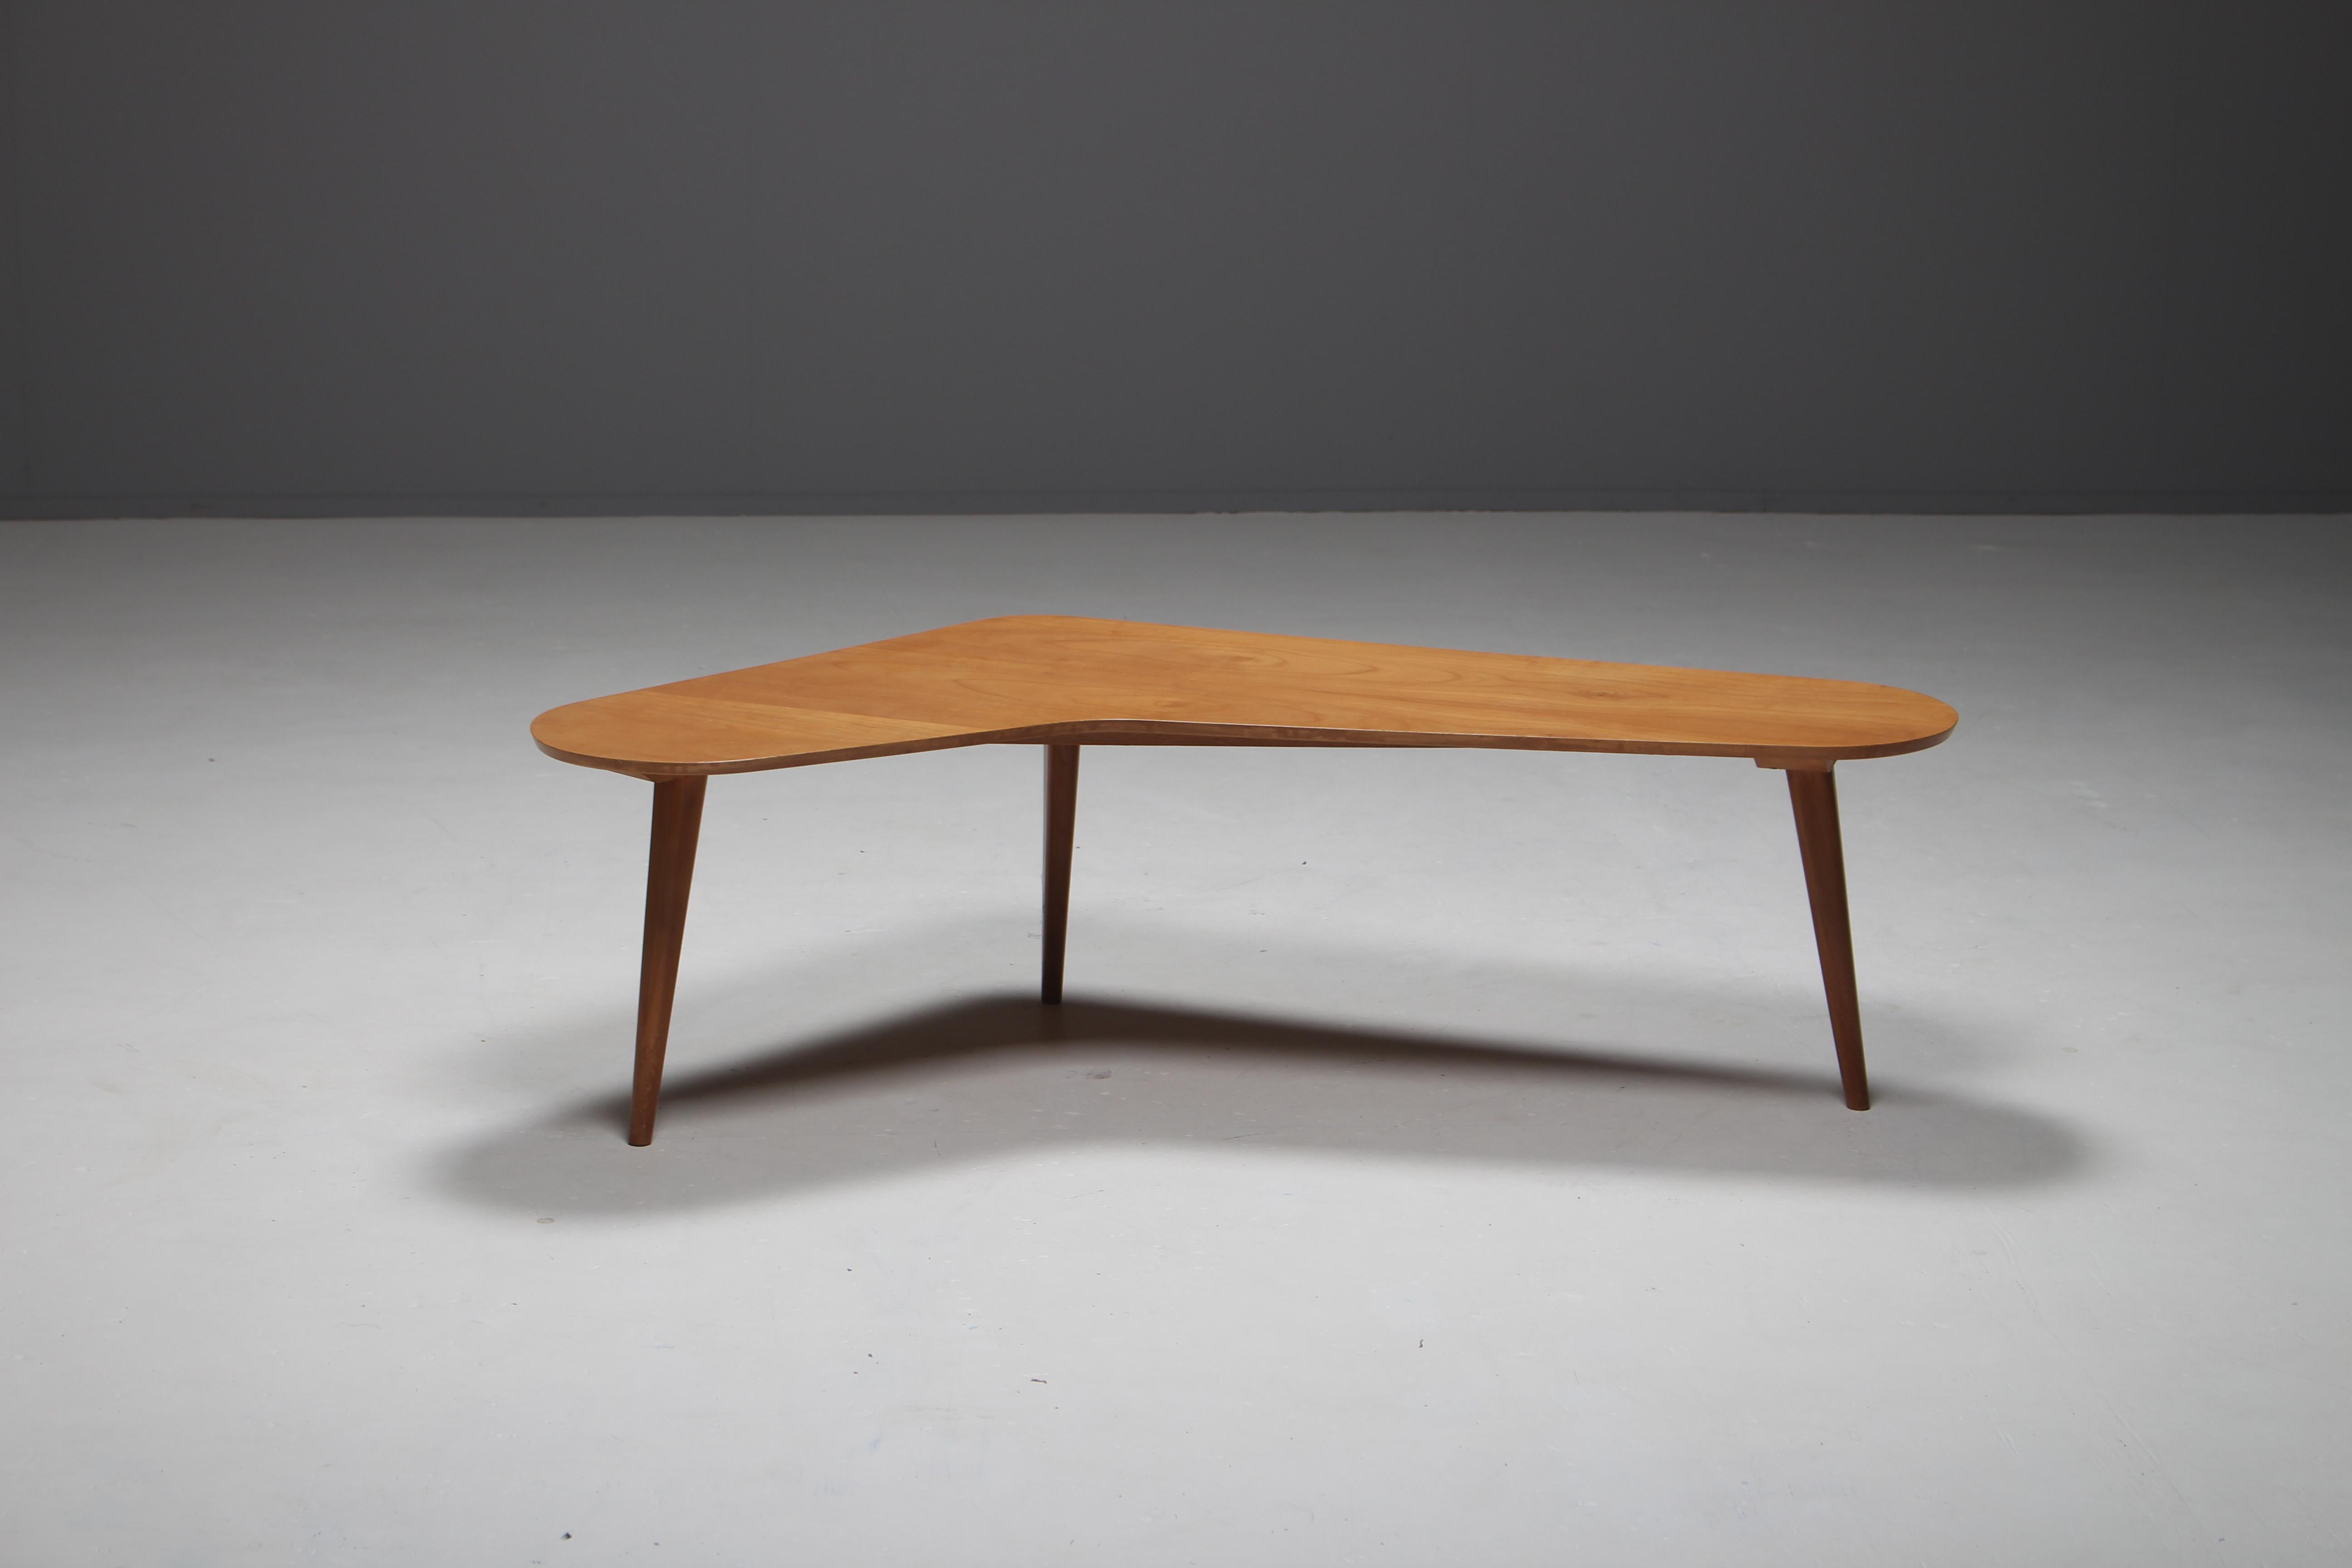 Dutch Freeform Coffee Table by Bovenkamp Attributed to Aksel Bender Madsen, 1960s For Sale